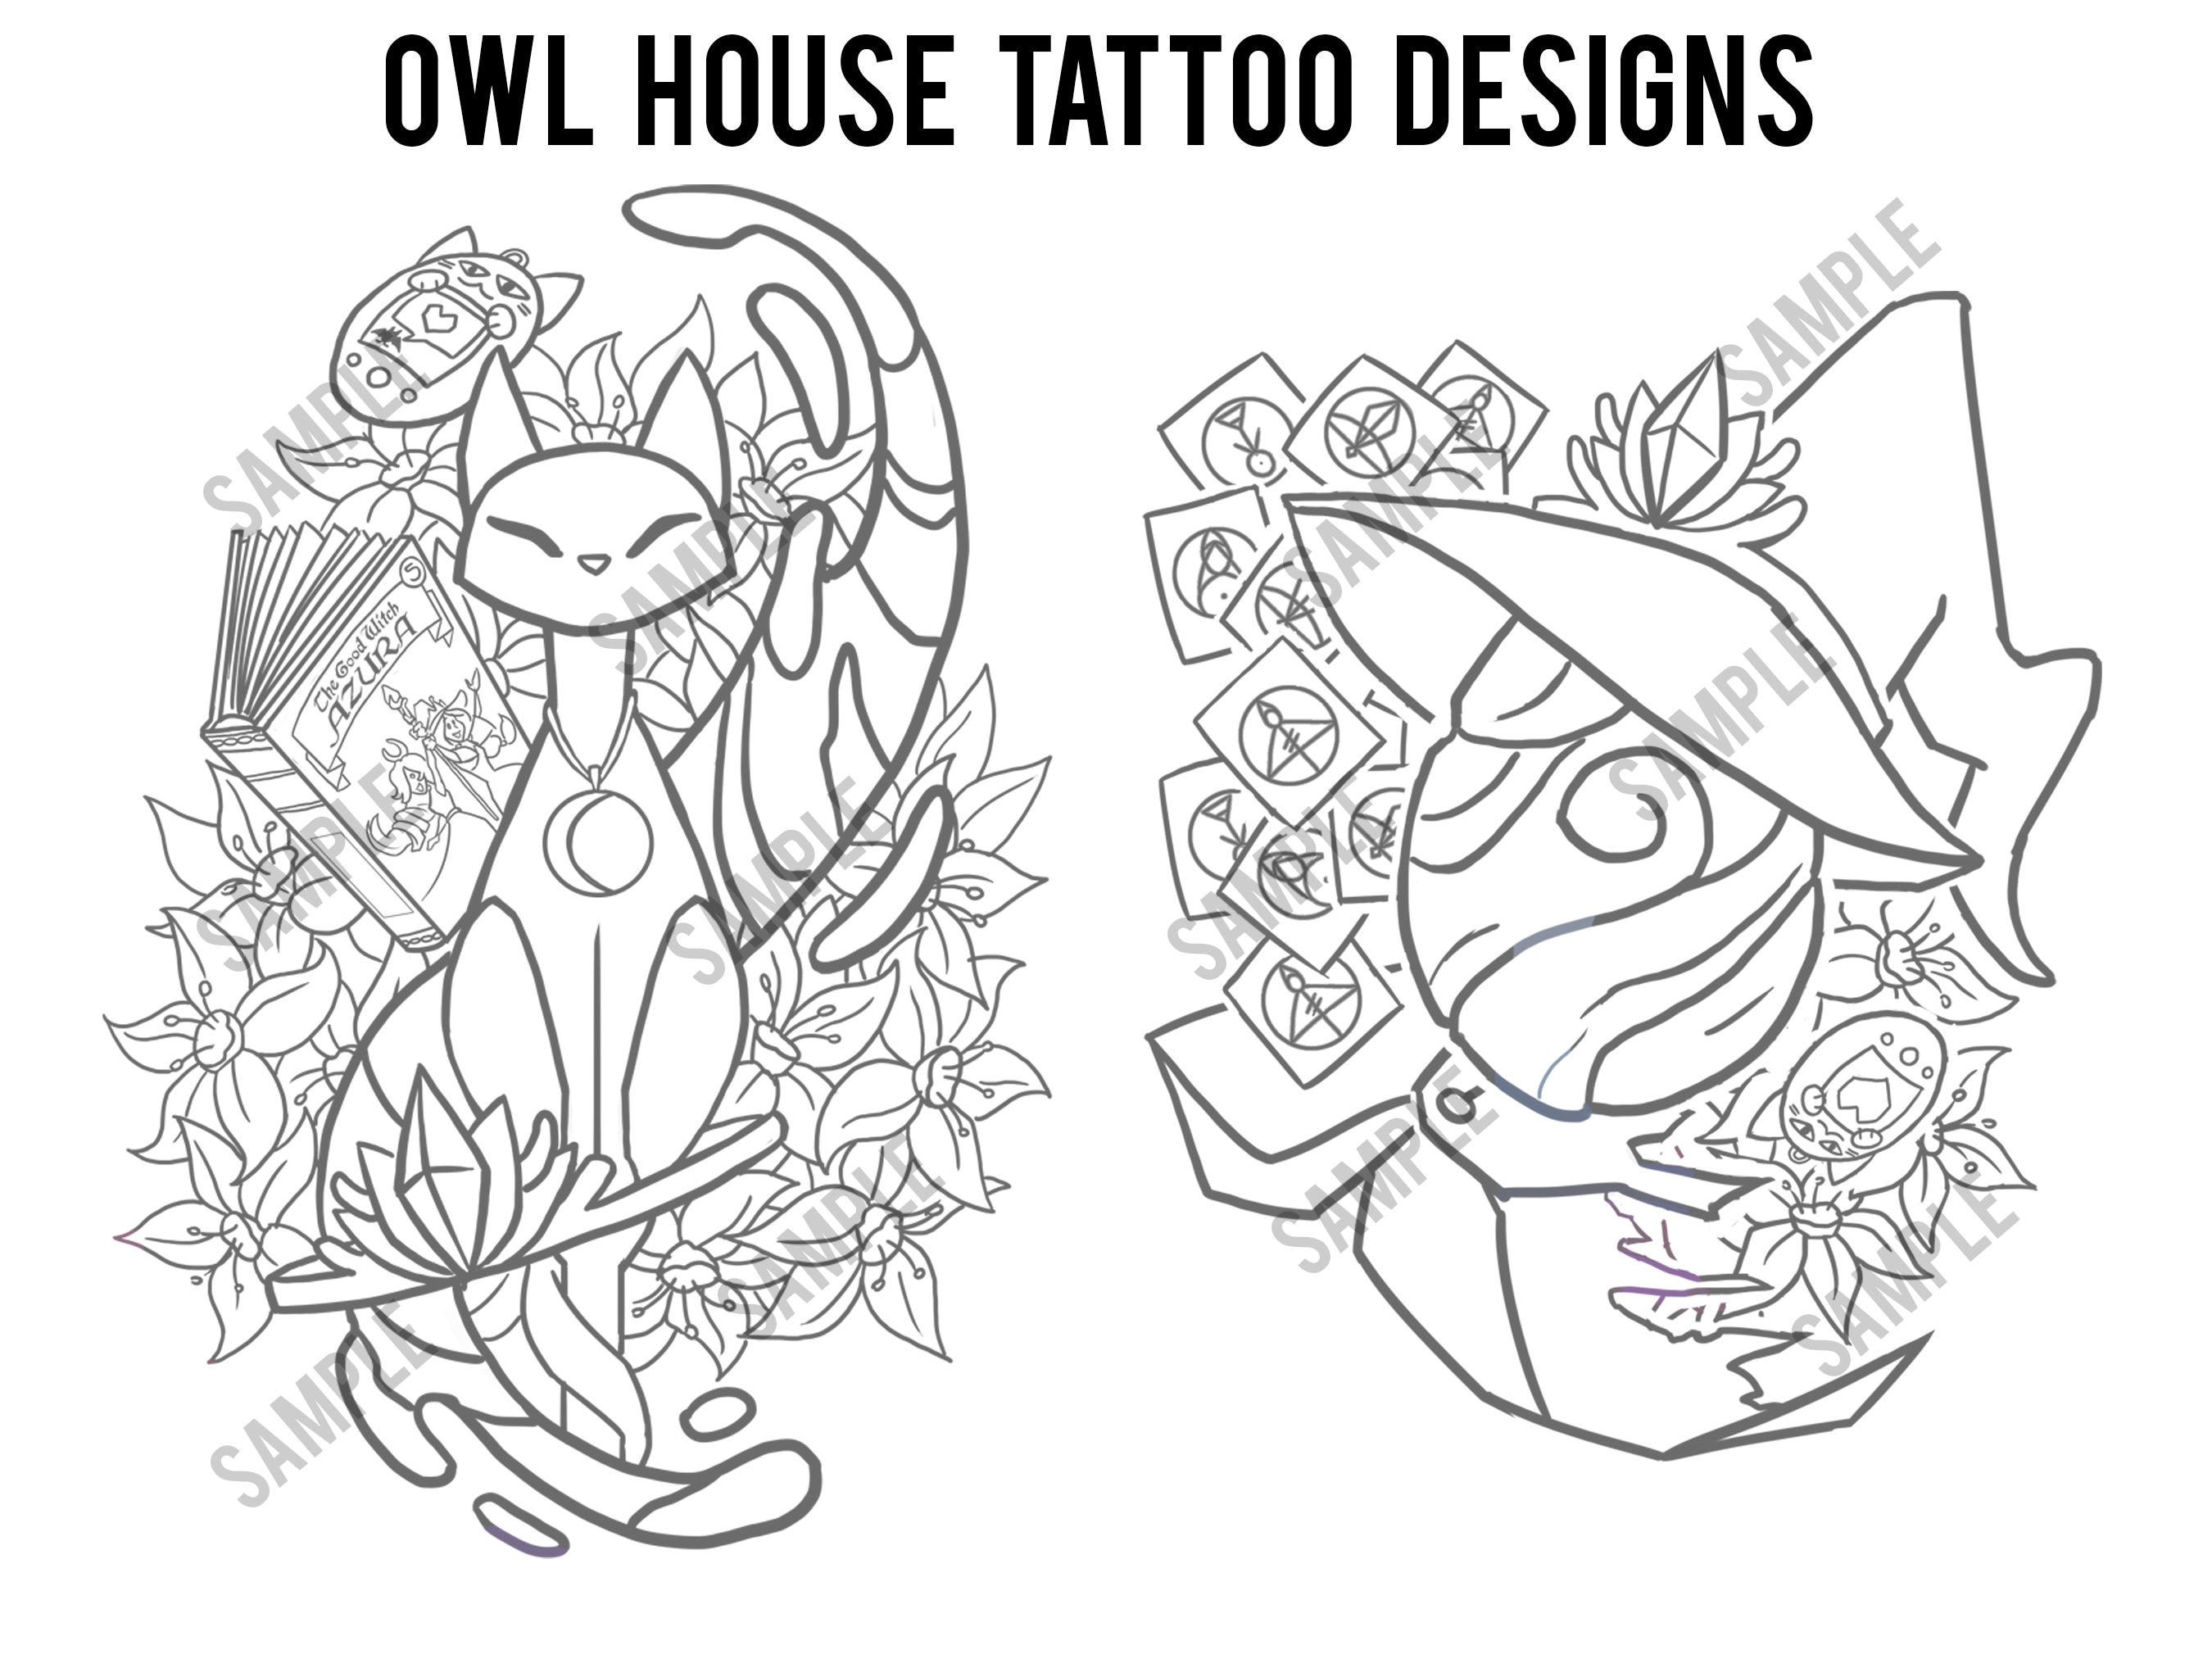 Tattoos are supposed to have a meaning Well this actually does mean  something it means Im funny as hell and have great taste  rTheOwlHouse